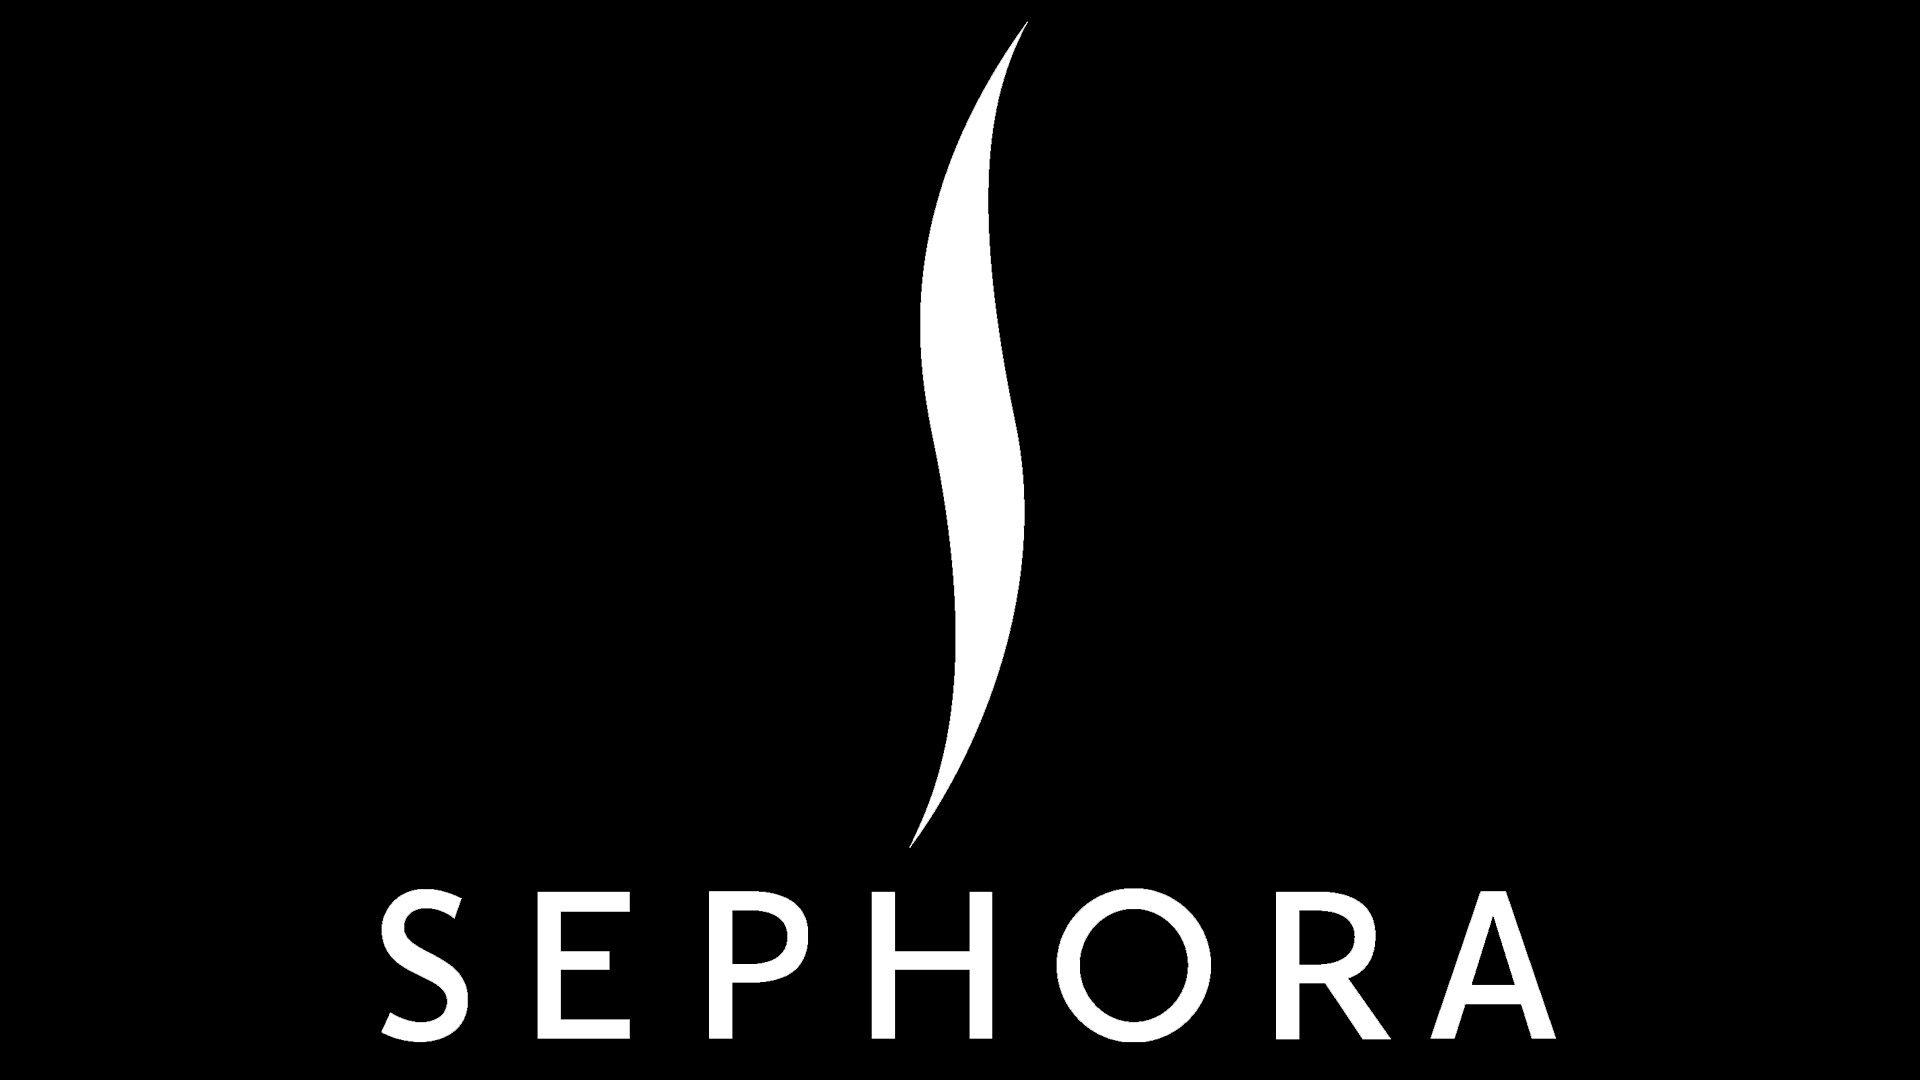 Sephora Logo - Sephora logo, Sephora Symbol, Meaning, History and Evolution